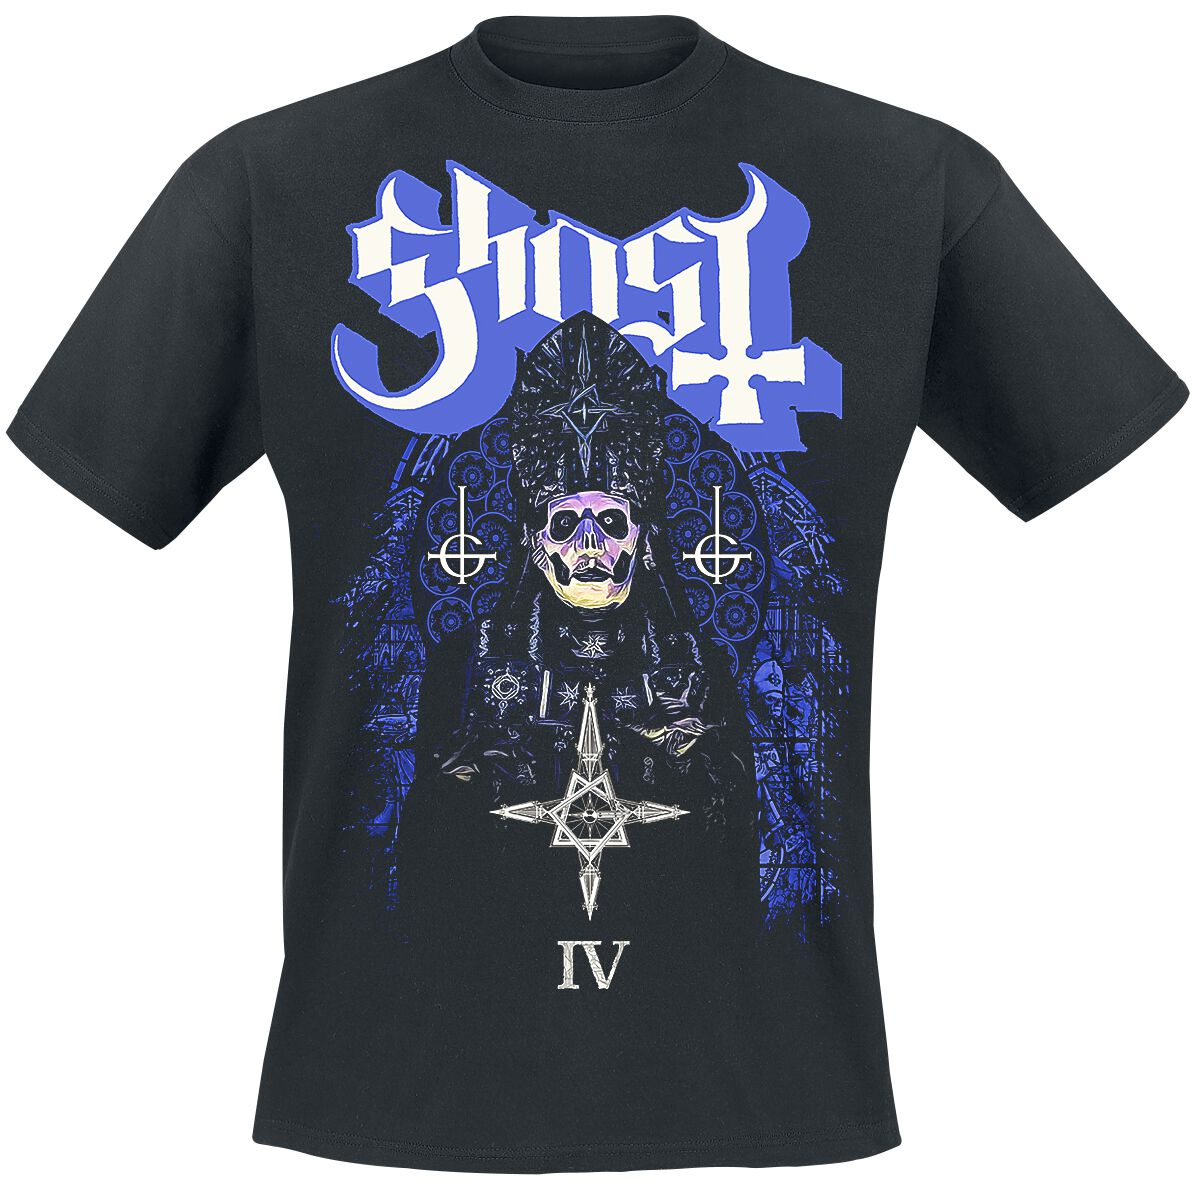 Ghost Stained Glass IV T-Shirt schwarz in 3XL